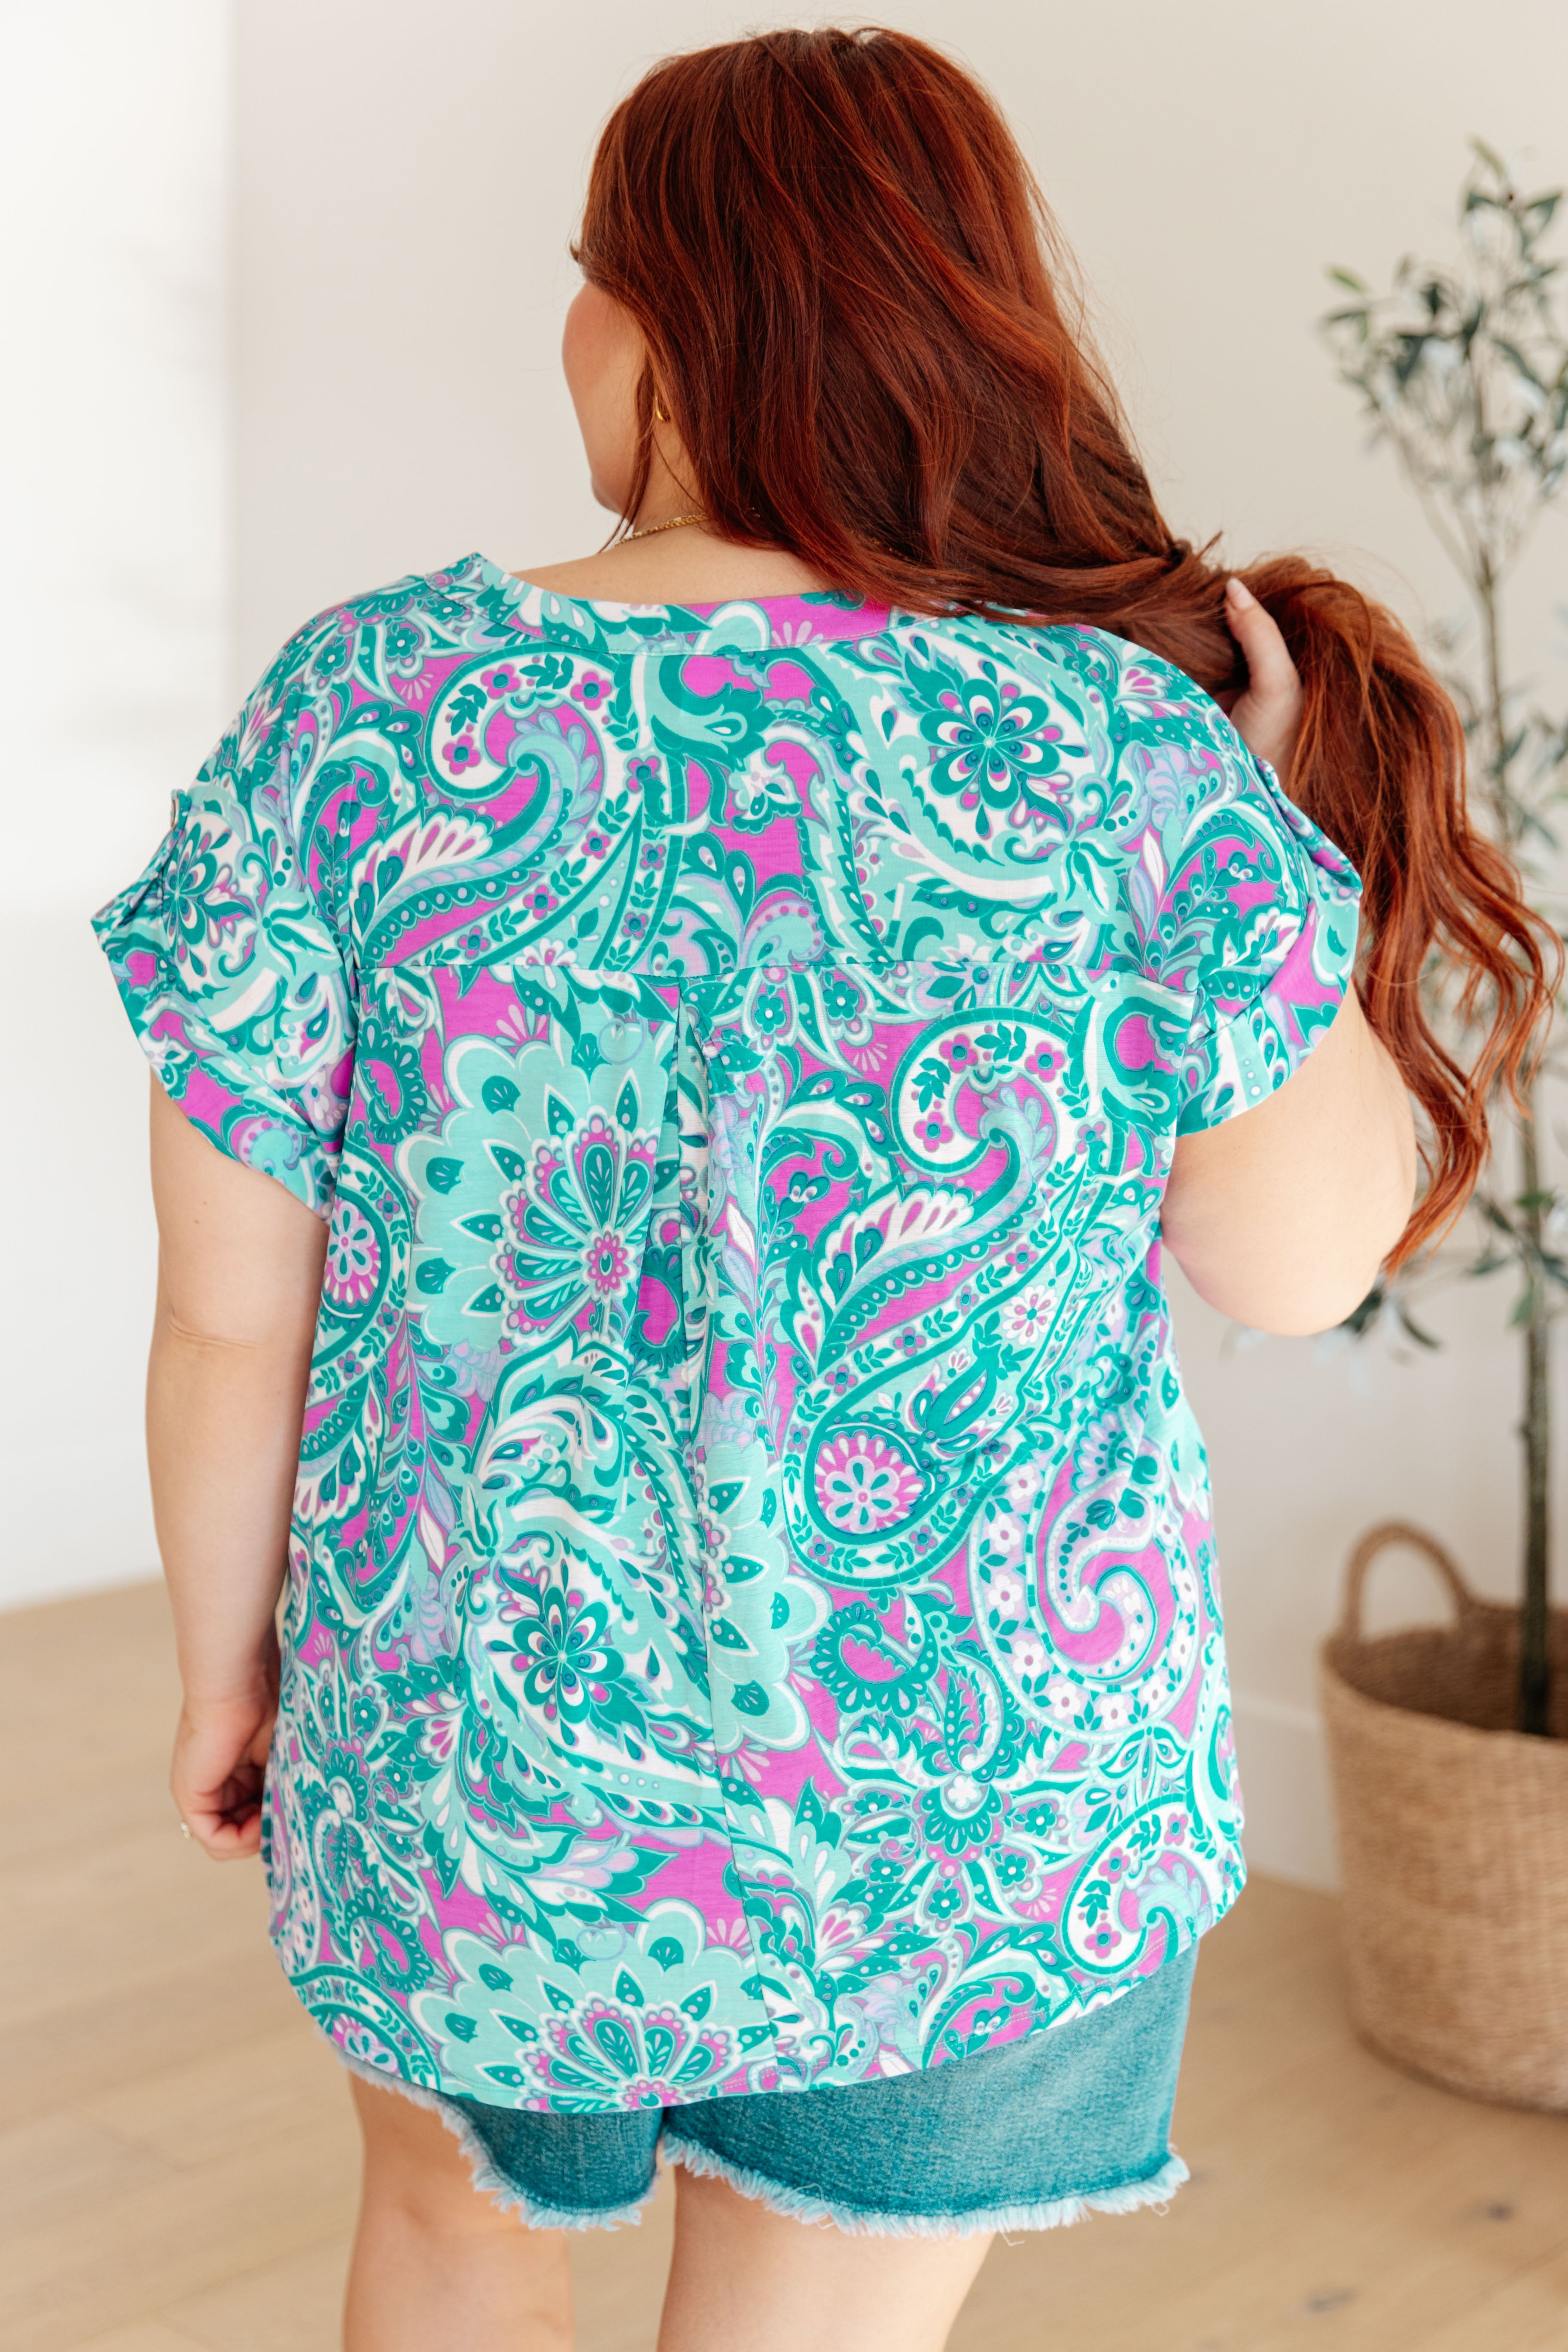 Dear Scarlett Lizzy Cap Sleeve Top in Magenta and Teal Paisley Ave Shops